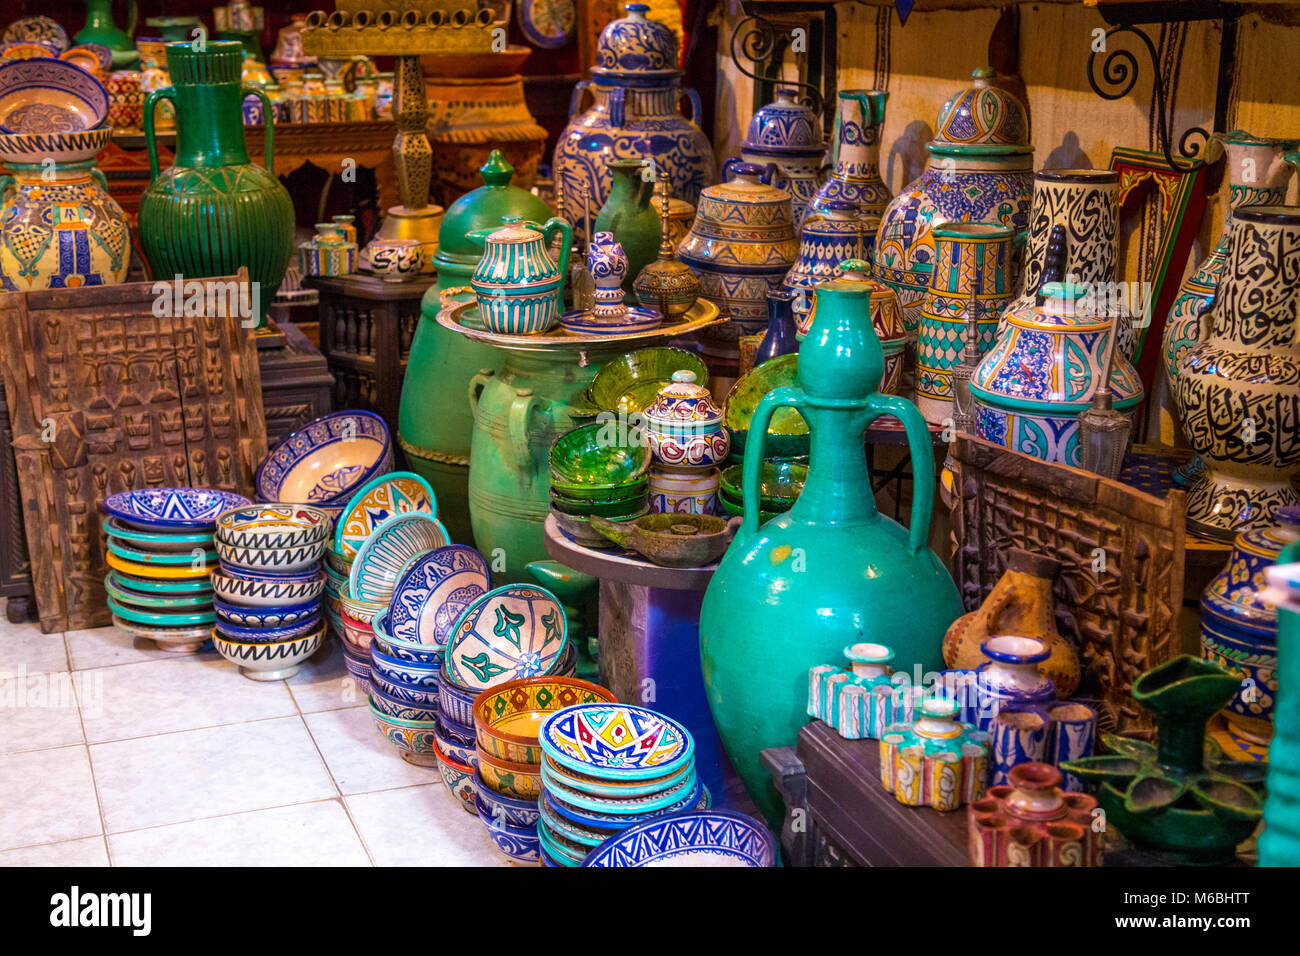 Colourful Moroccan pottery in a shop in the Old Medina souqs, Fes, Morocco Stock Photo